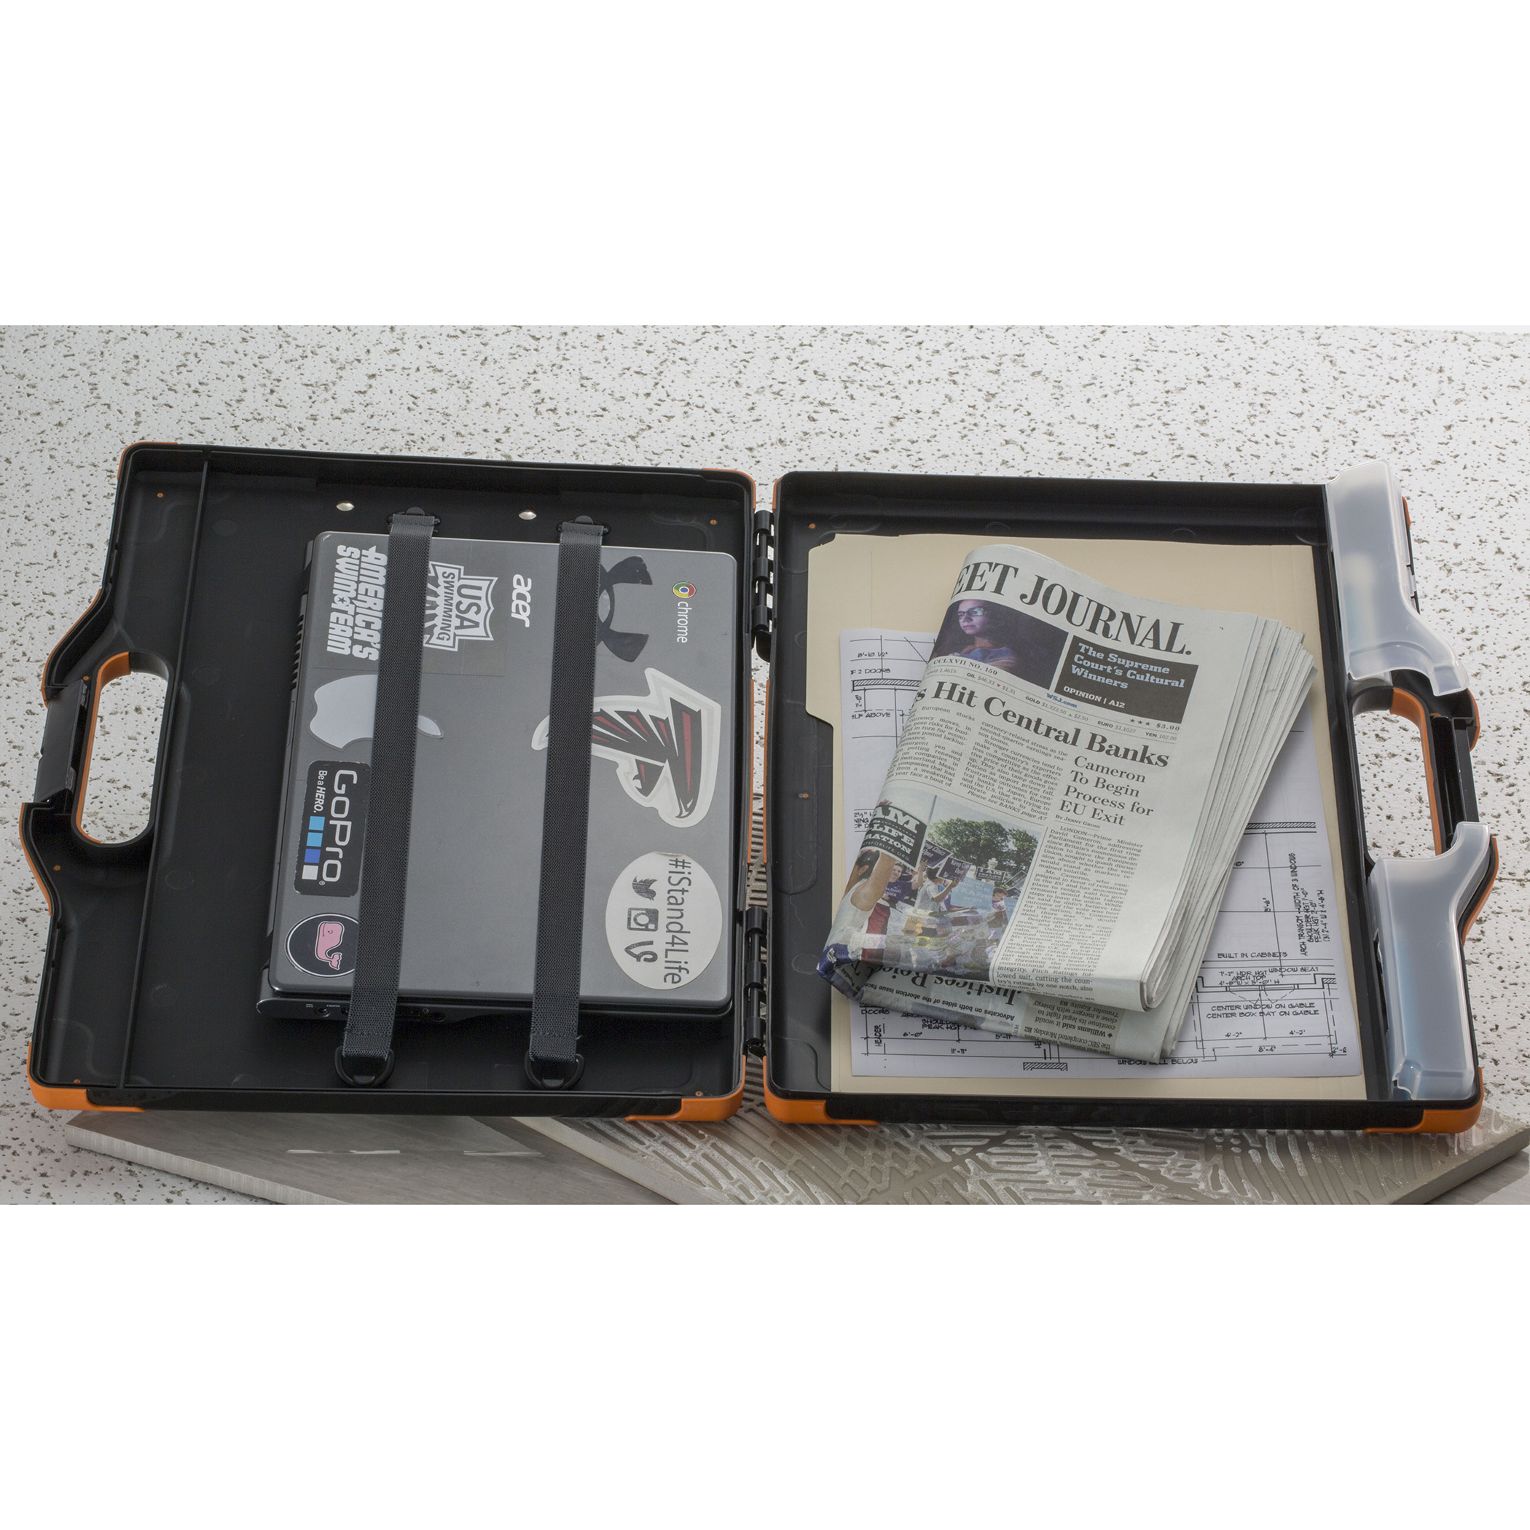 Officemate 83217 Magnetic Clipboard - Aluminum - Gray